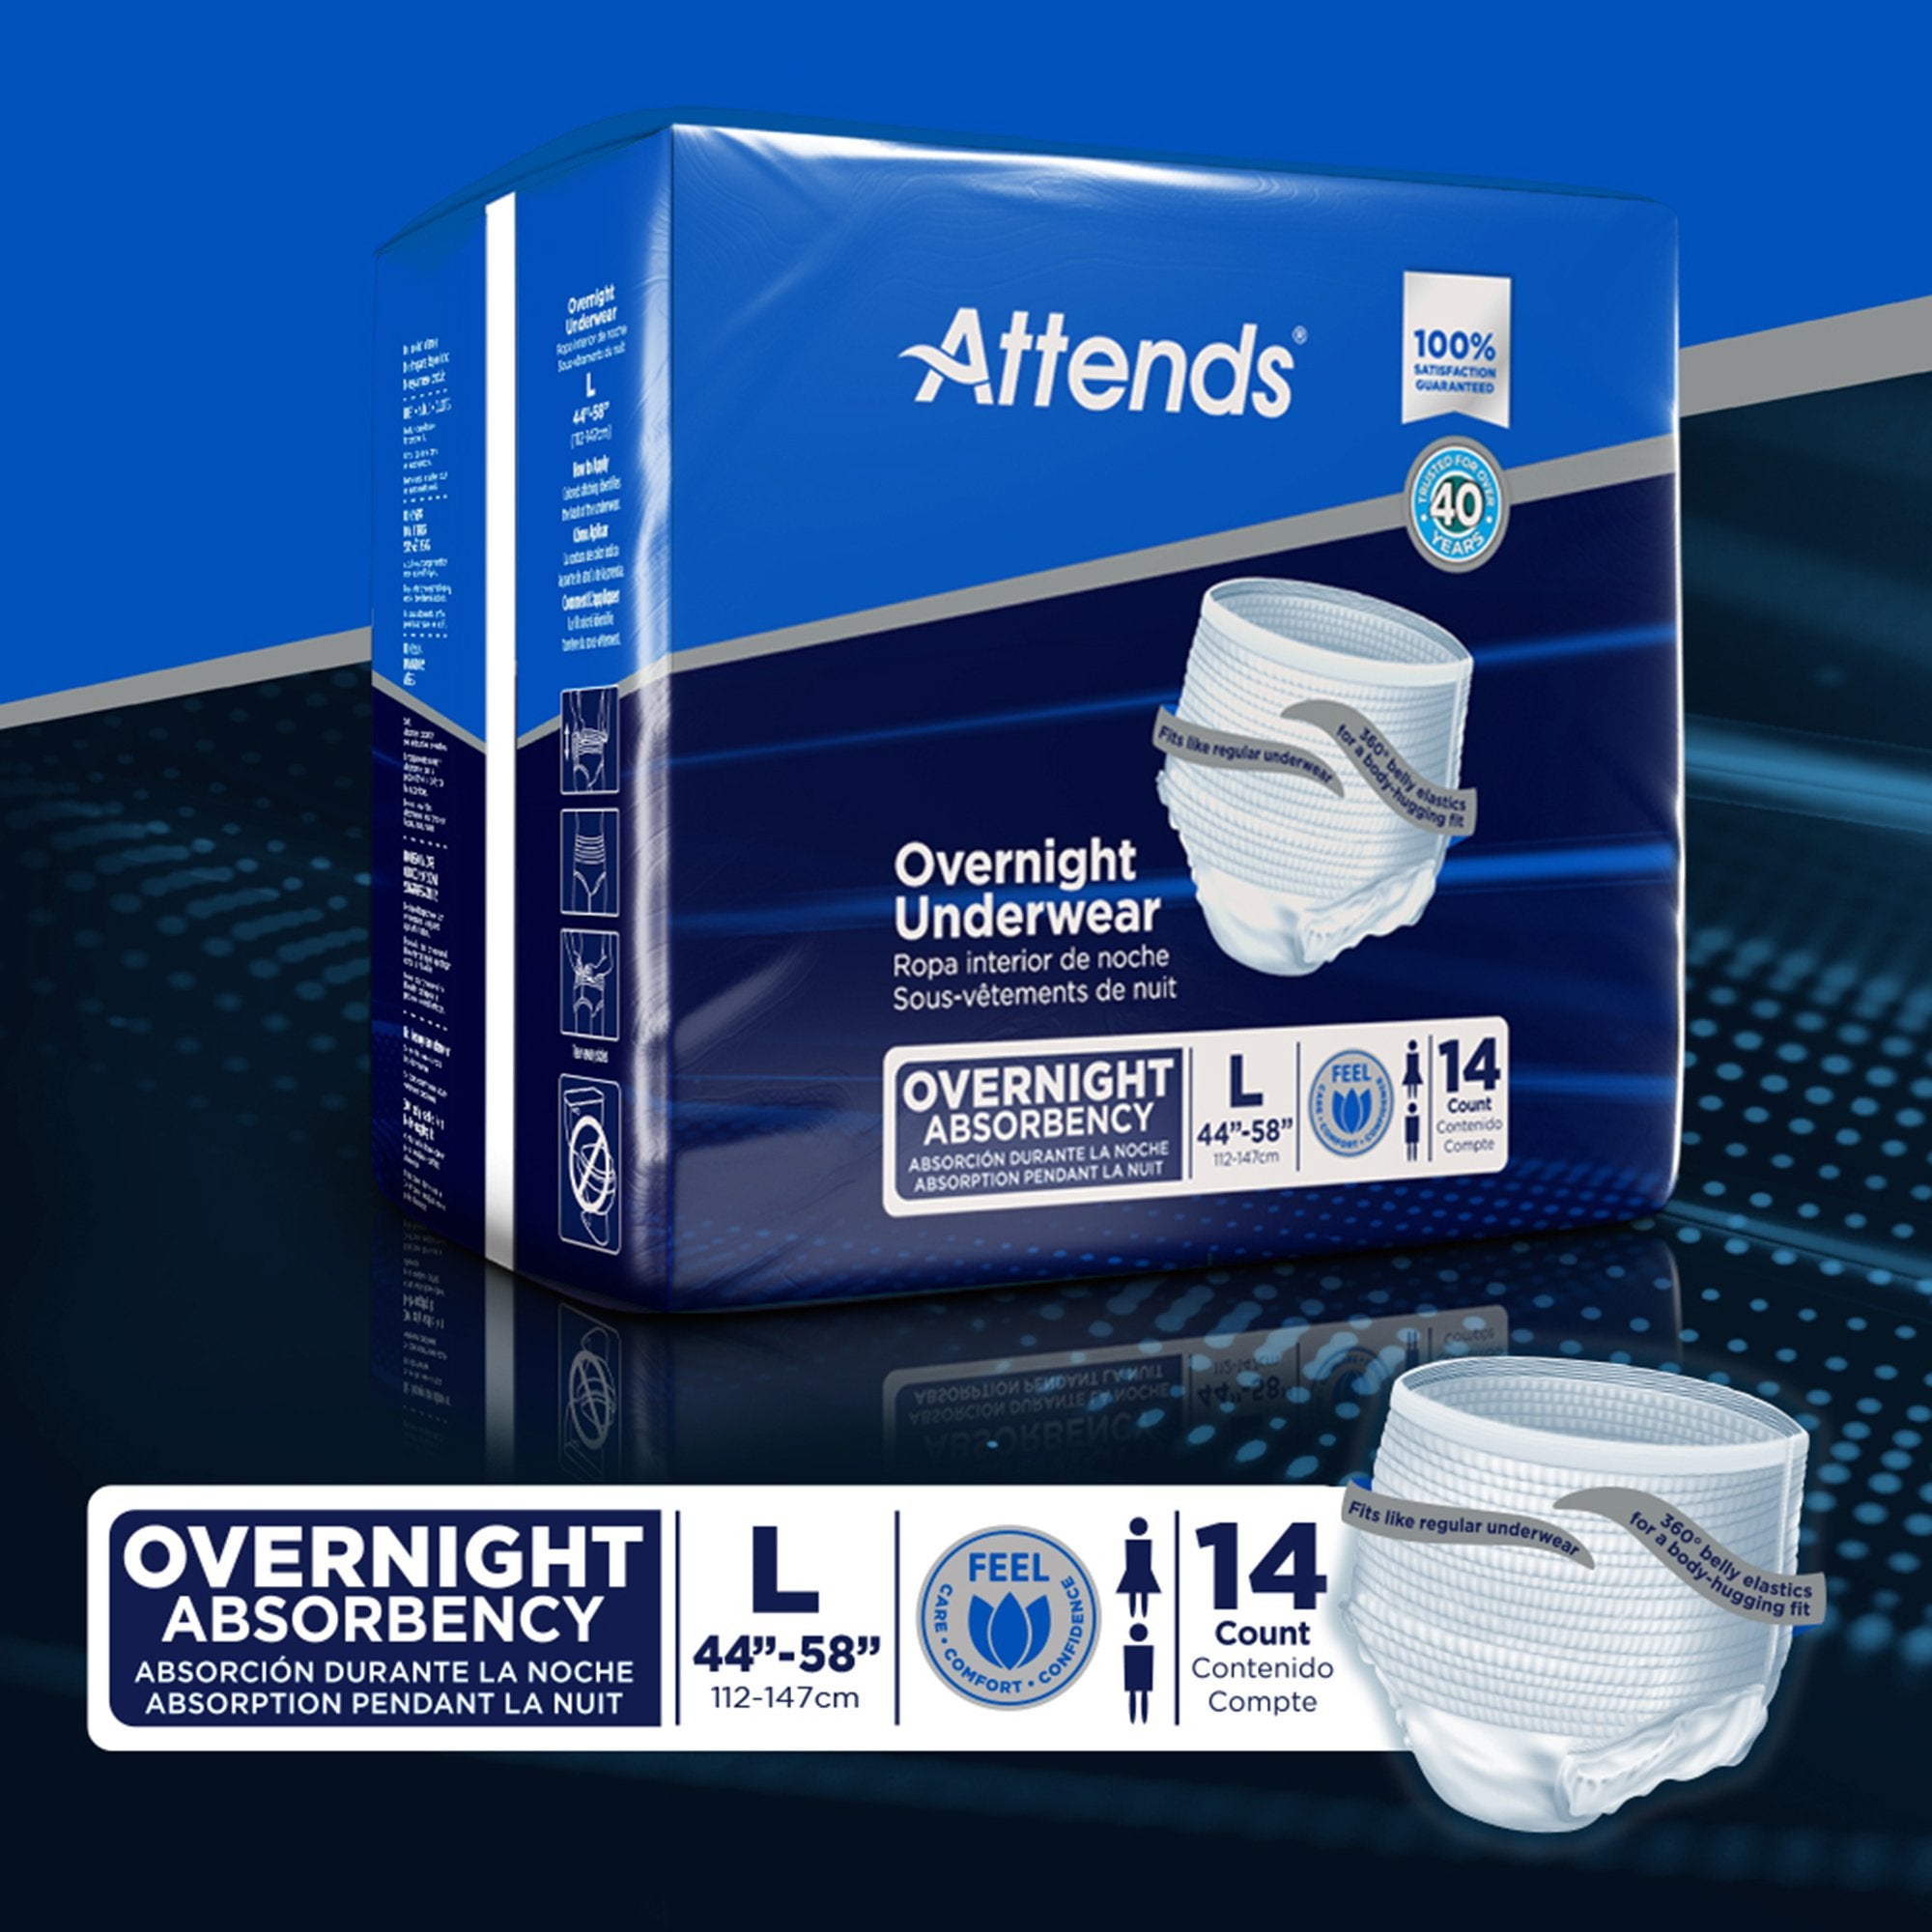 Unisex Adult Absorbent Underwear Attends® Overnight Pull On with Tear Away Seams Large Disposable Heavy Absorbency